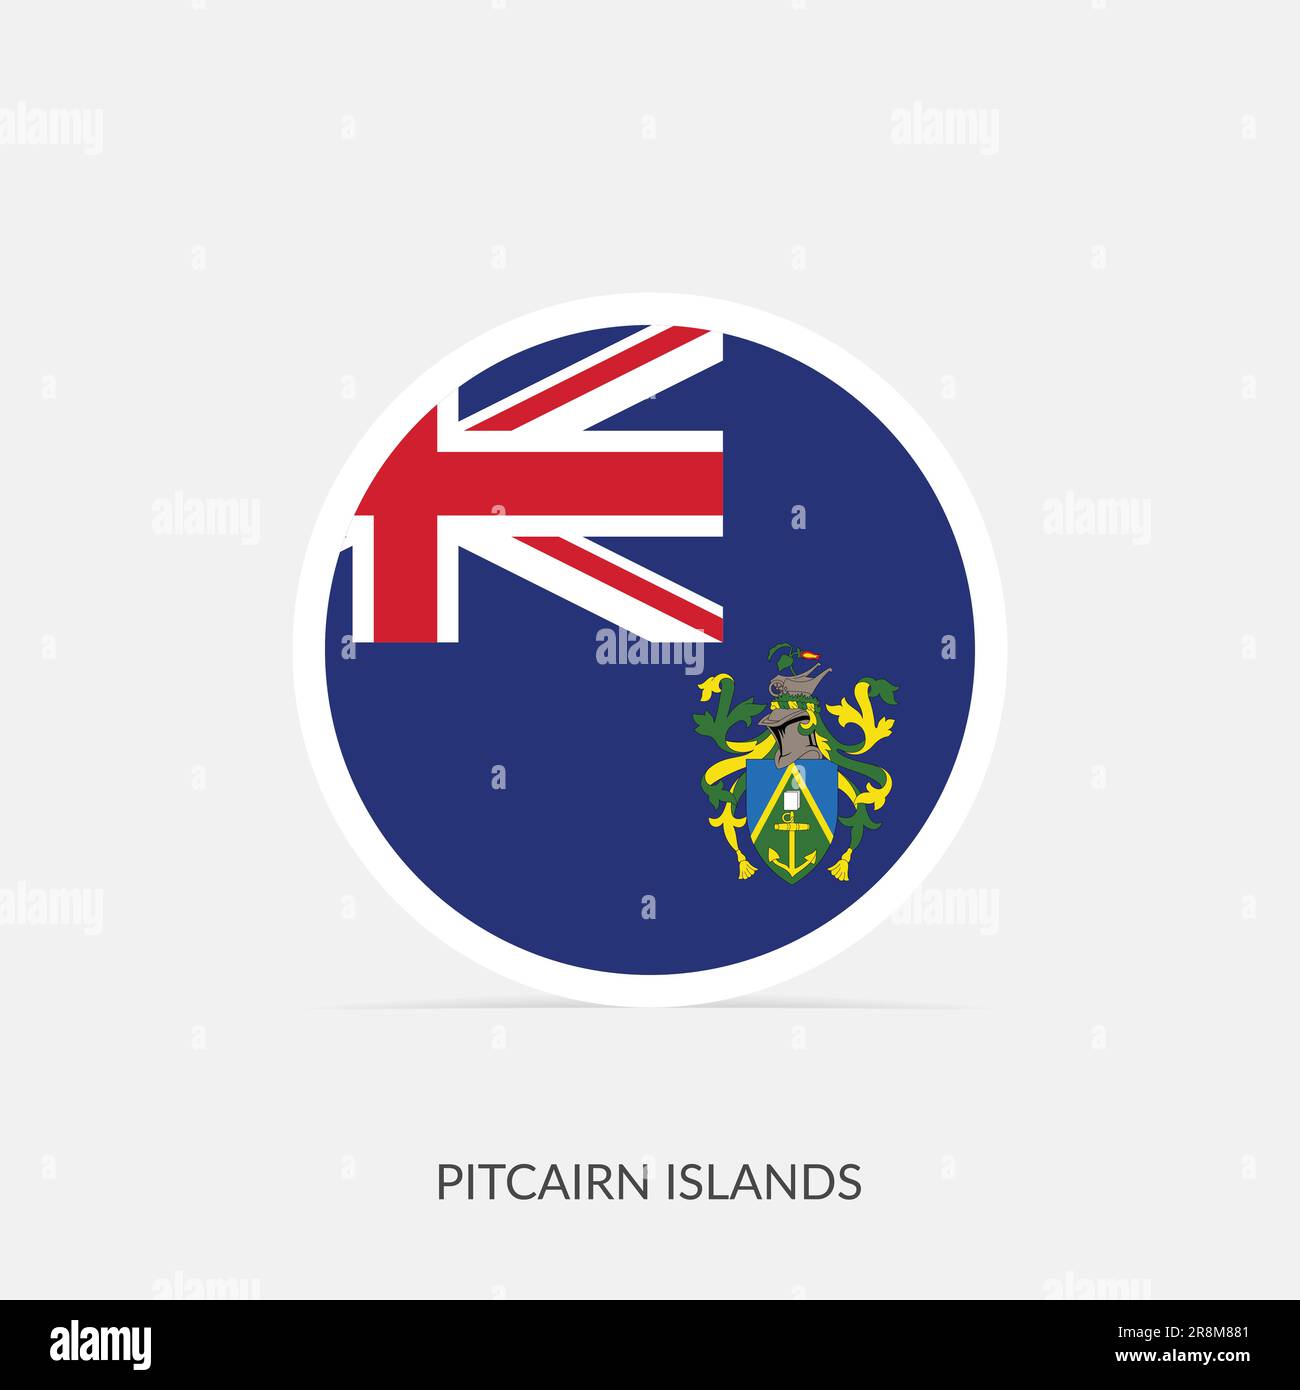 Pitcairn Islands round flag icon with shadow. Stock Vector